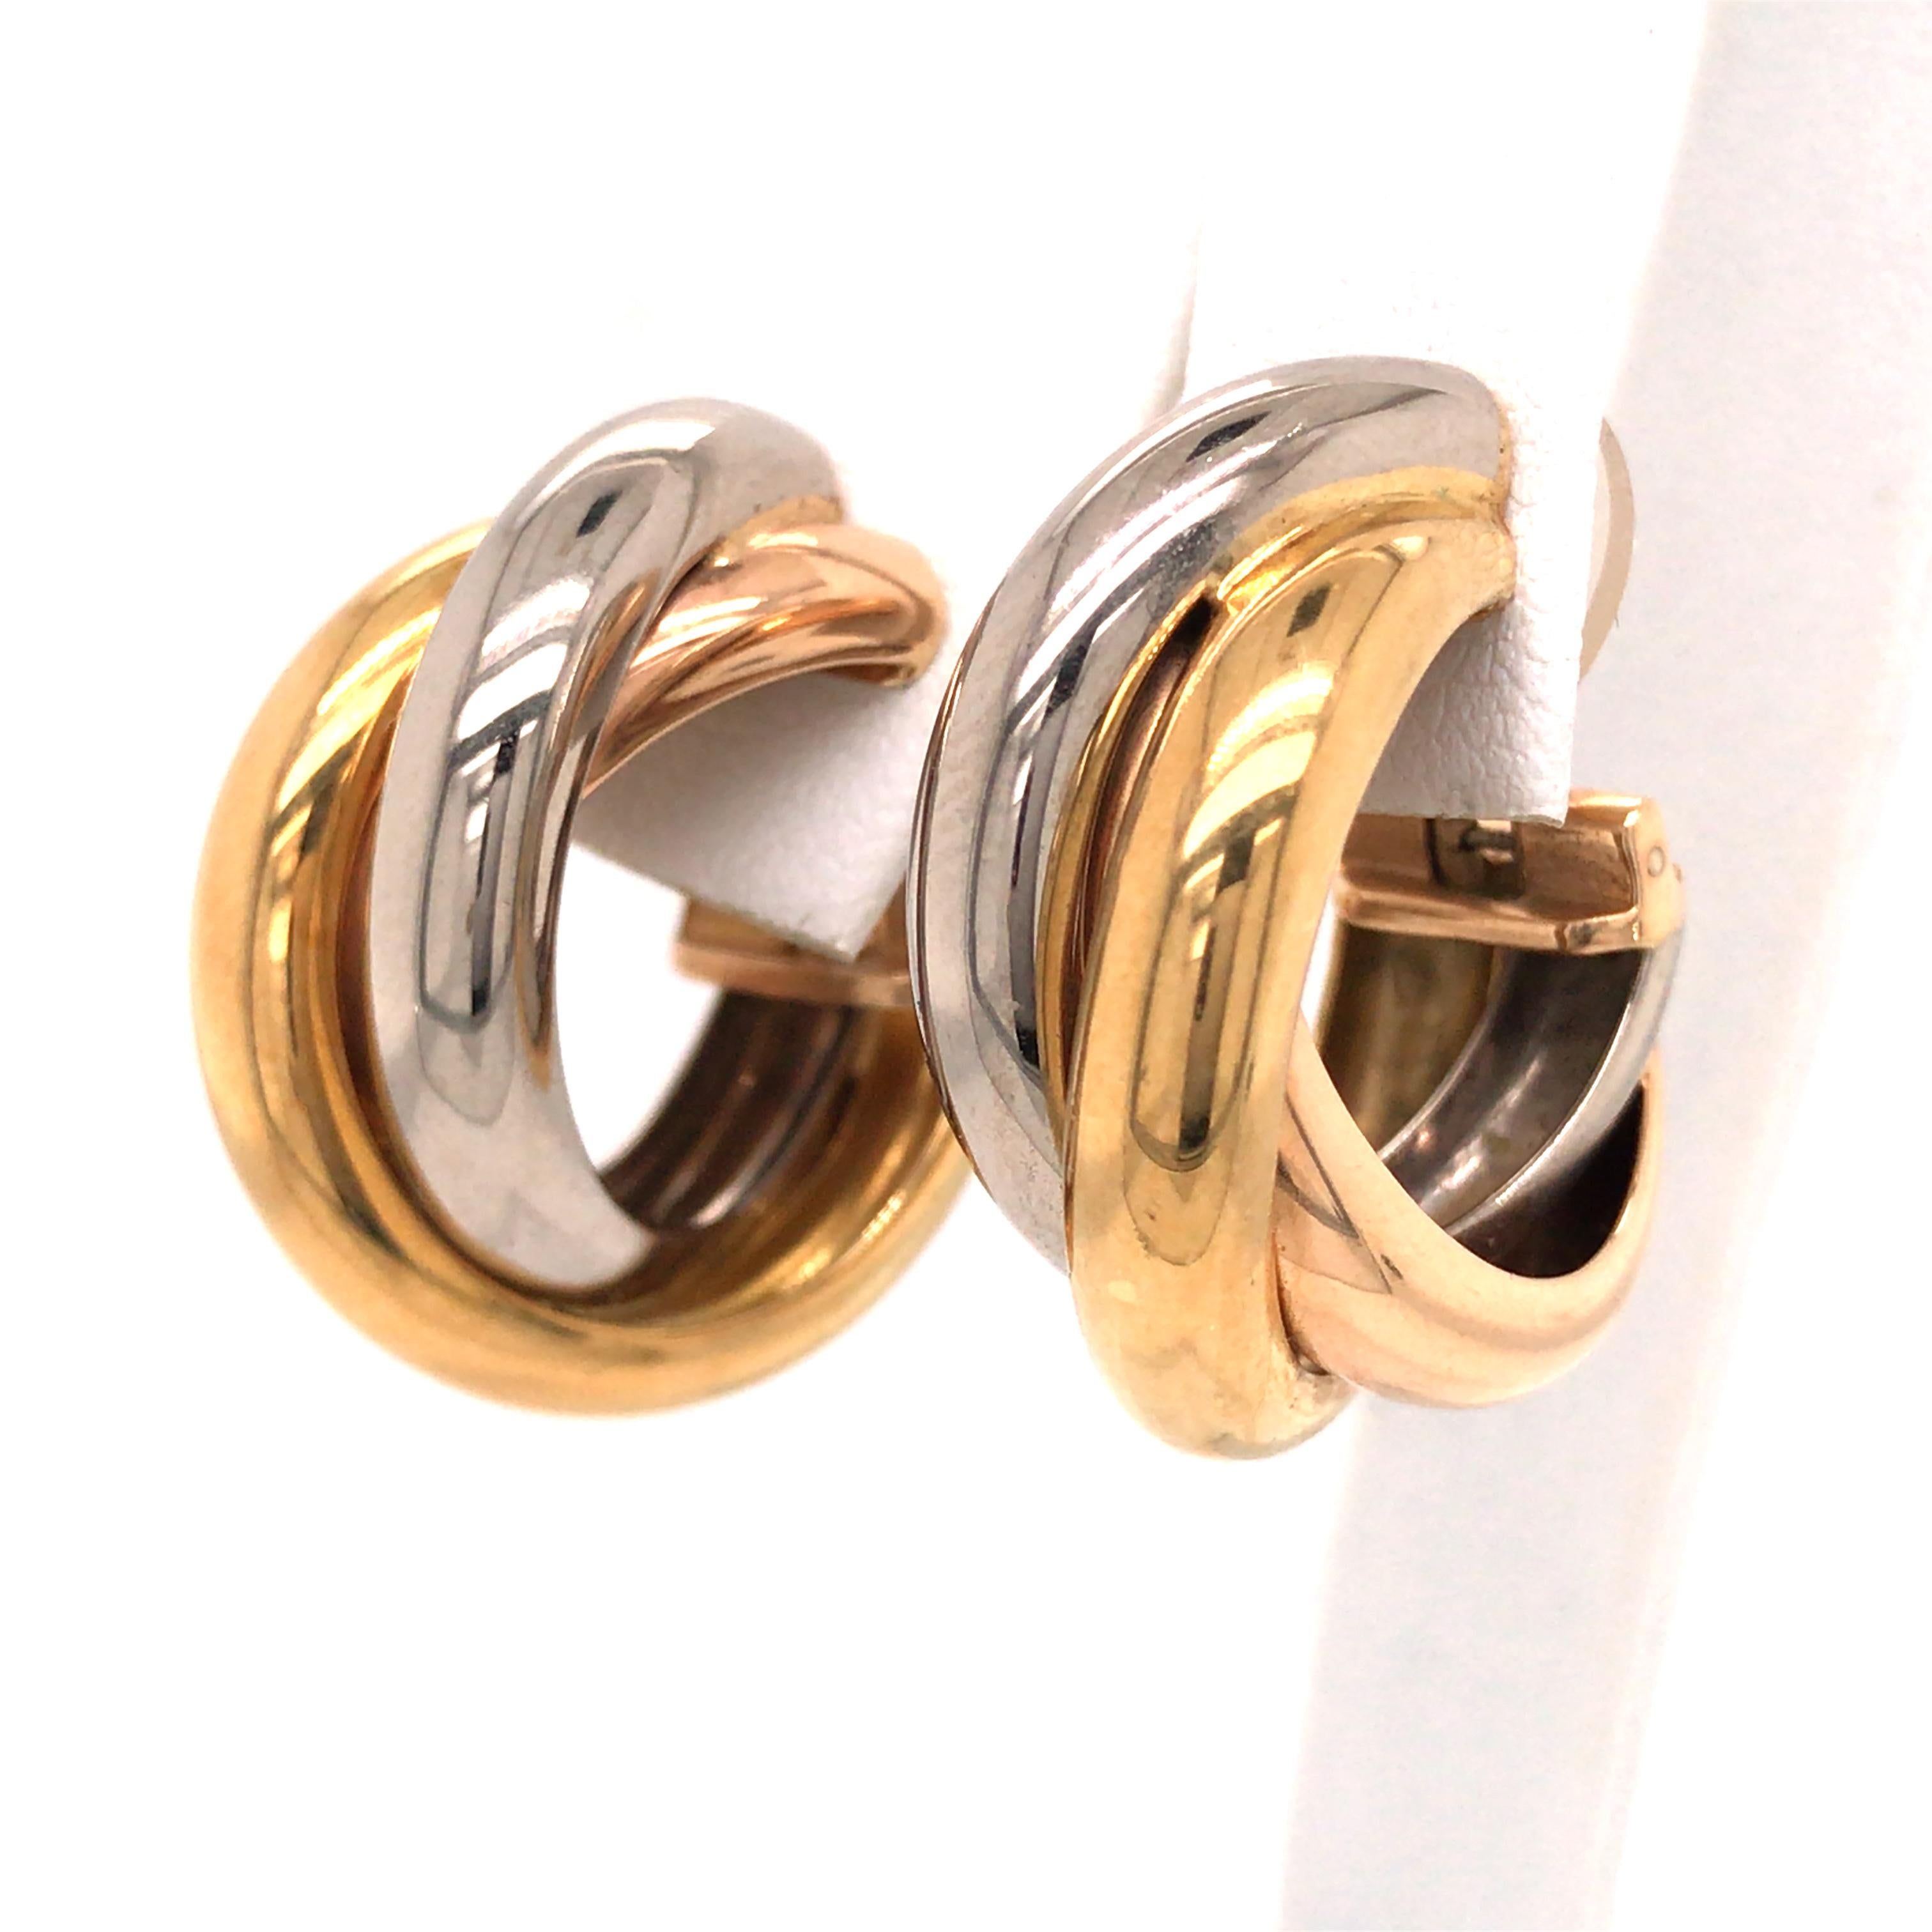 Cartier Trinity Large 18K Tri-Color Gold Hoop Earrings.  The Earrings measure 1 inch in length and 3/8 inch in width.  Clip on/off closure. 14.46 grams. Signed, 750, serial number.